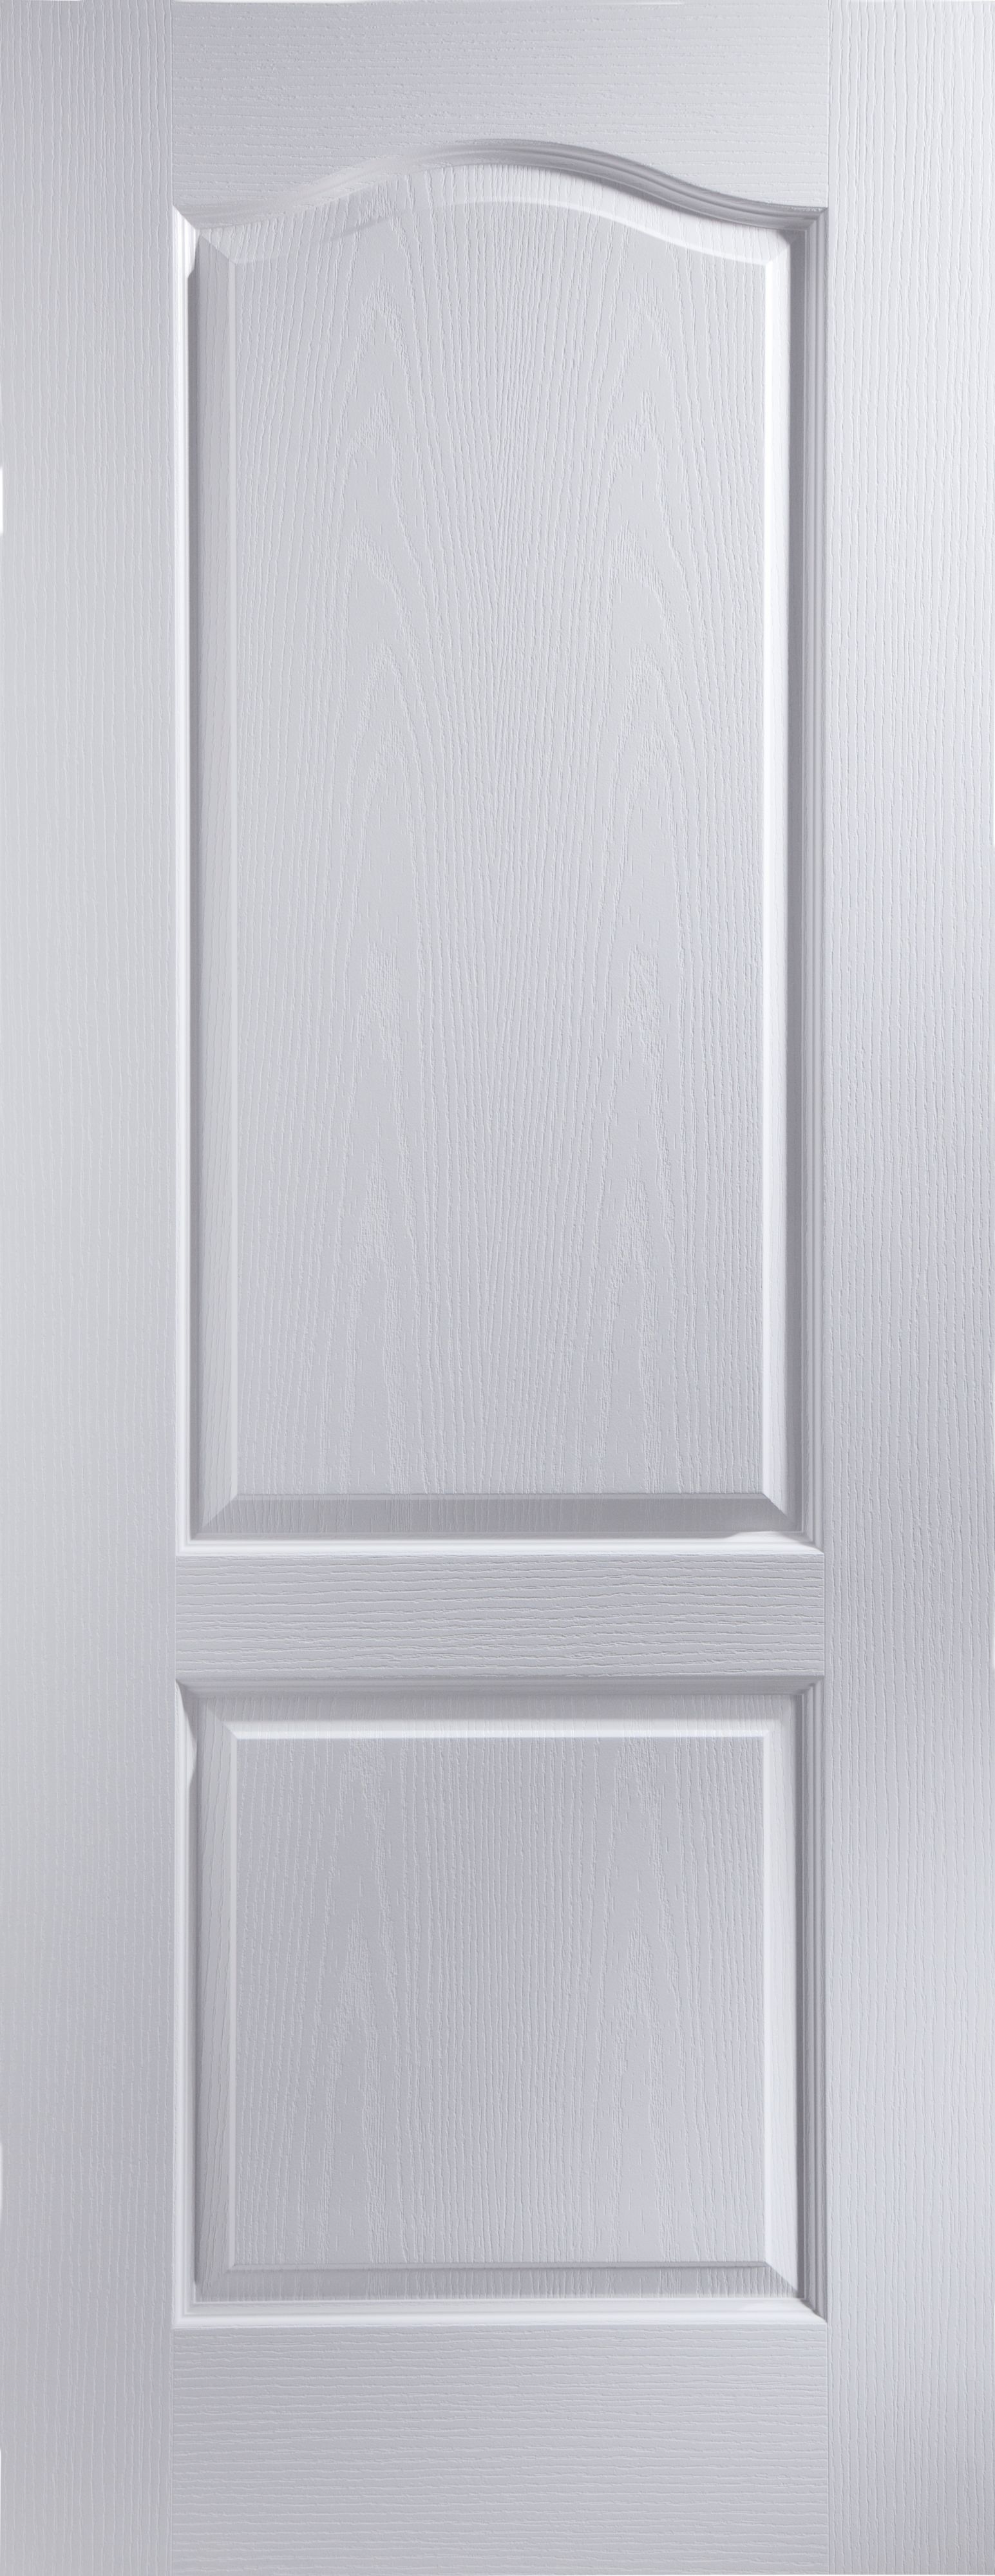 Arch painted 2 panel Unglazed Arched White Woodgrain effect Internal Door, (H)1981mm (W)762mm (T)35mm